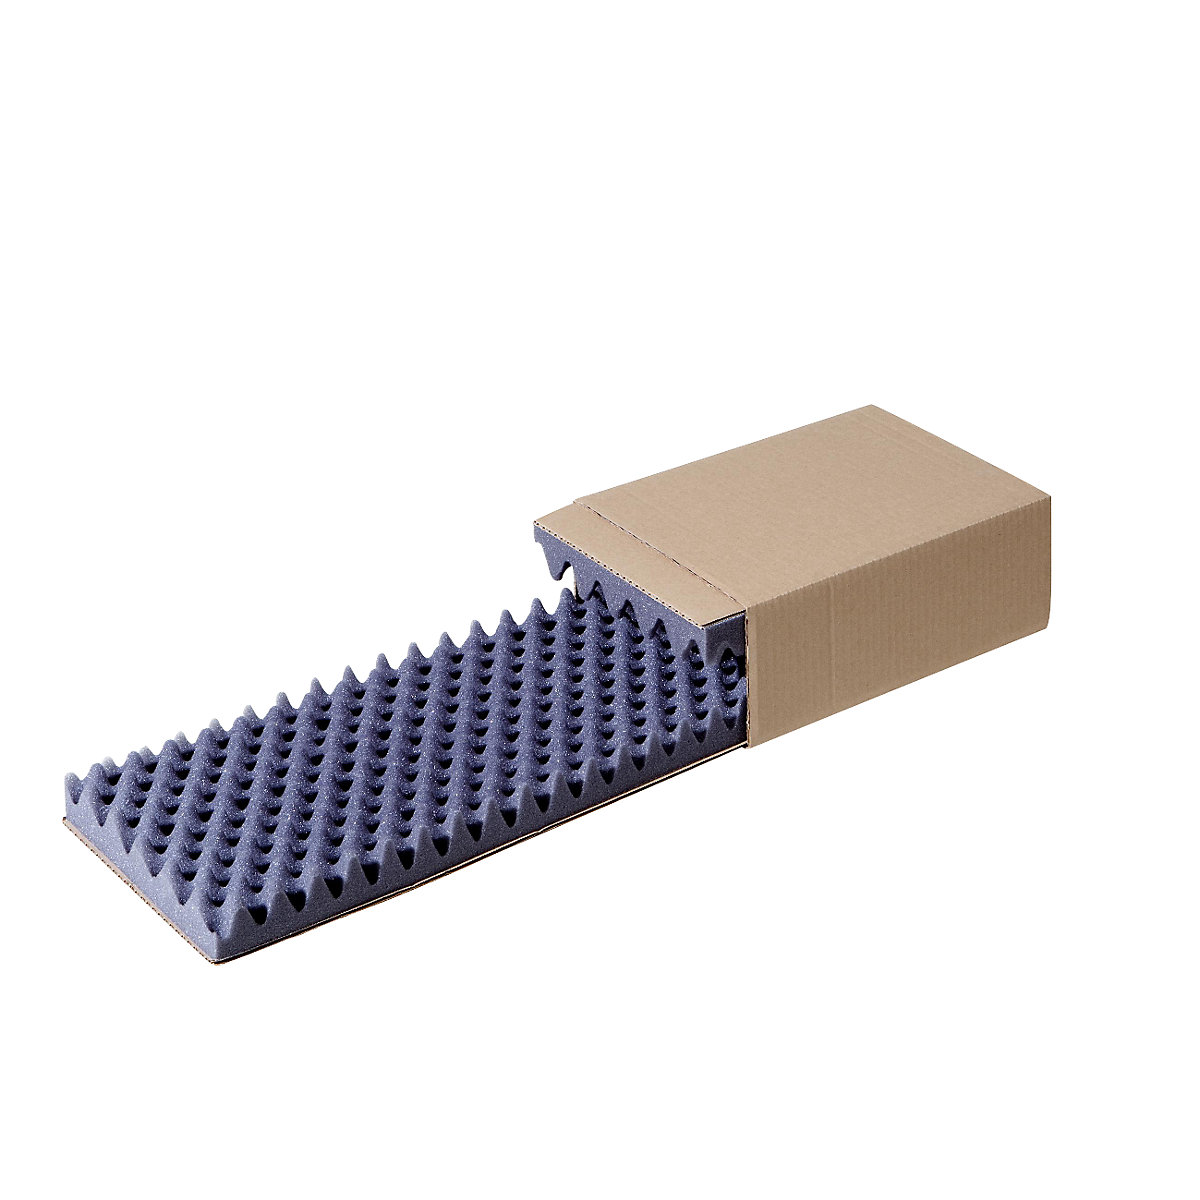 Slide boxes, internal part FEFCO 0907, external part FEFCO 0503, padded, internal dimensions 300 x 200 x 100 mm, pack of 100-5